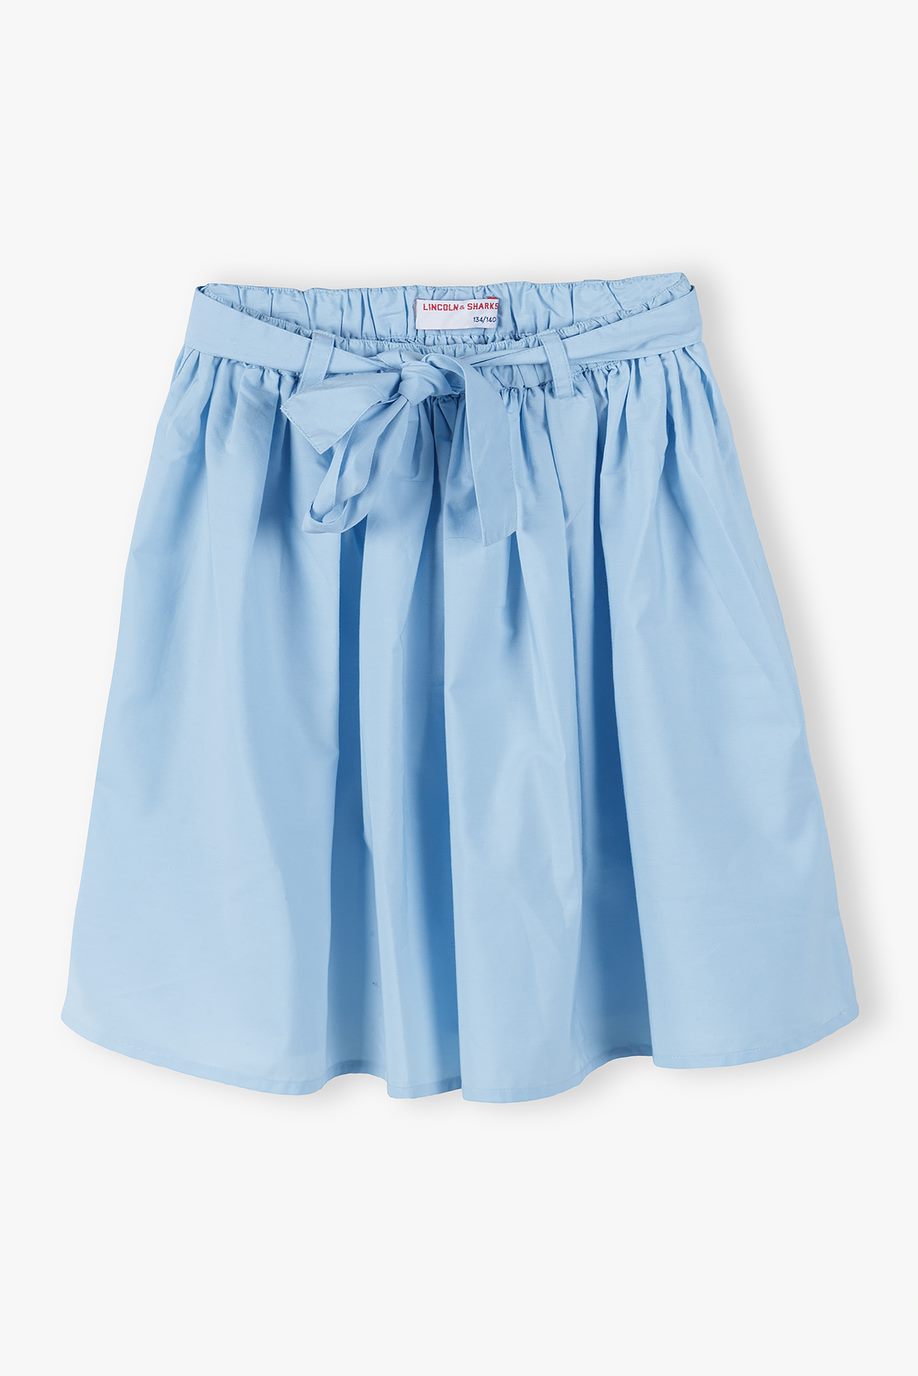 Children's skirt with a decorative bow - blue